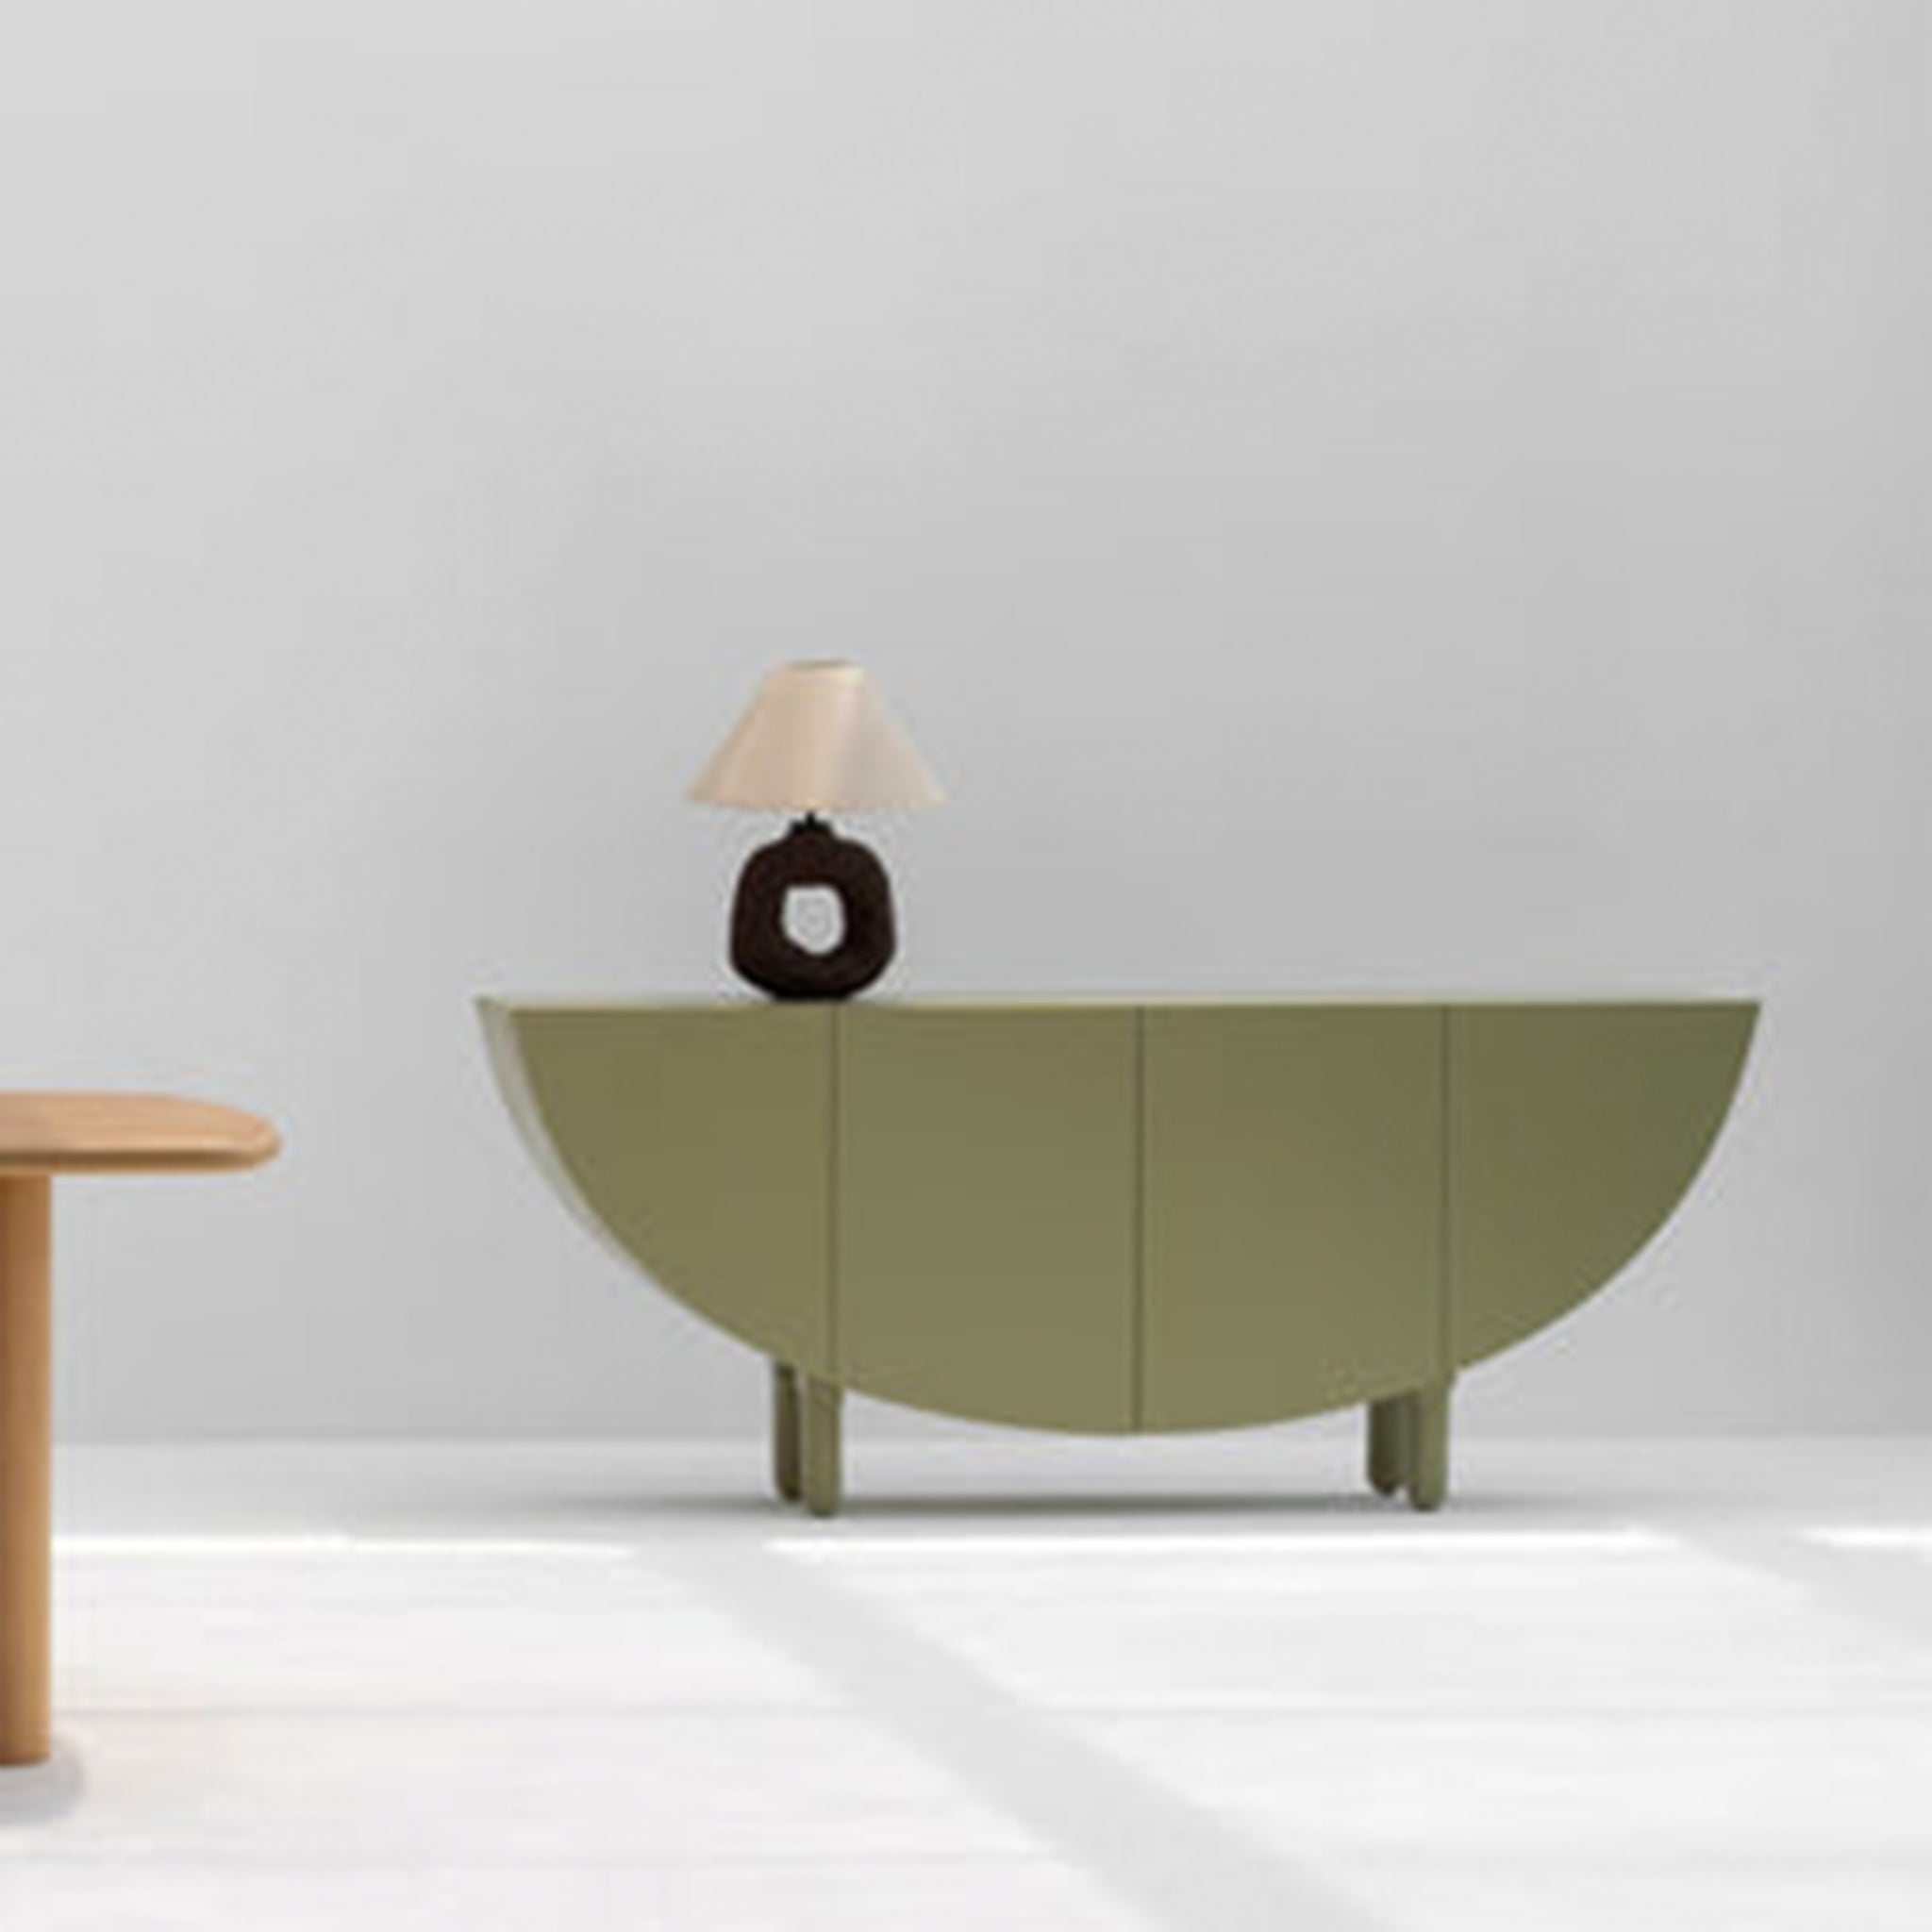 An olive green sideboard with a half-moon design, featuring a unique table lamp with a black base and beige shade, set against a light gray background. A portion of a wooden table is visible on the left side.